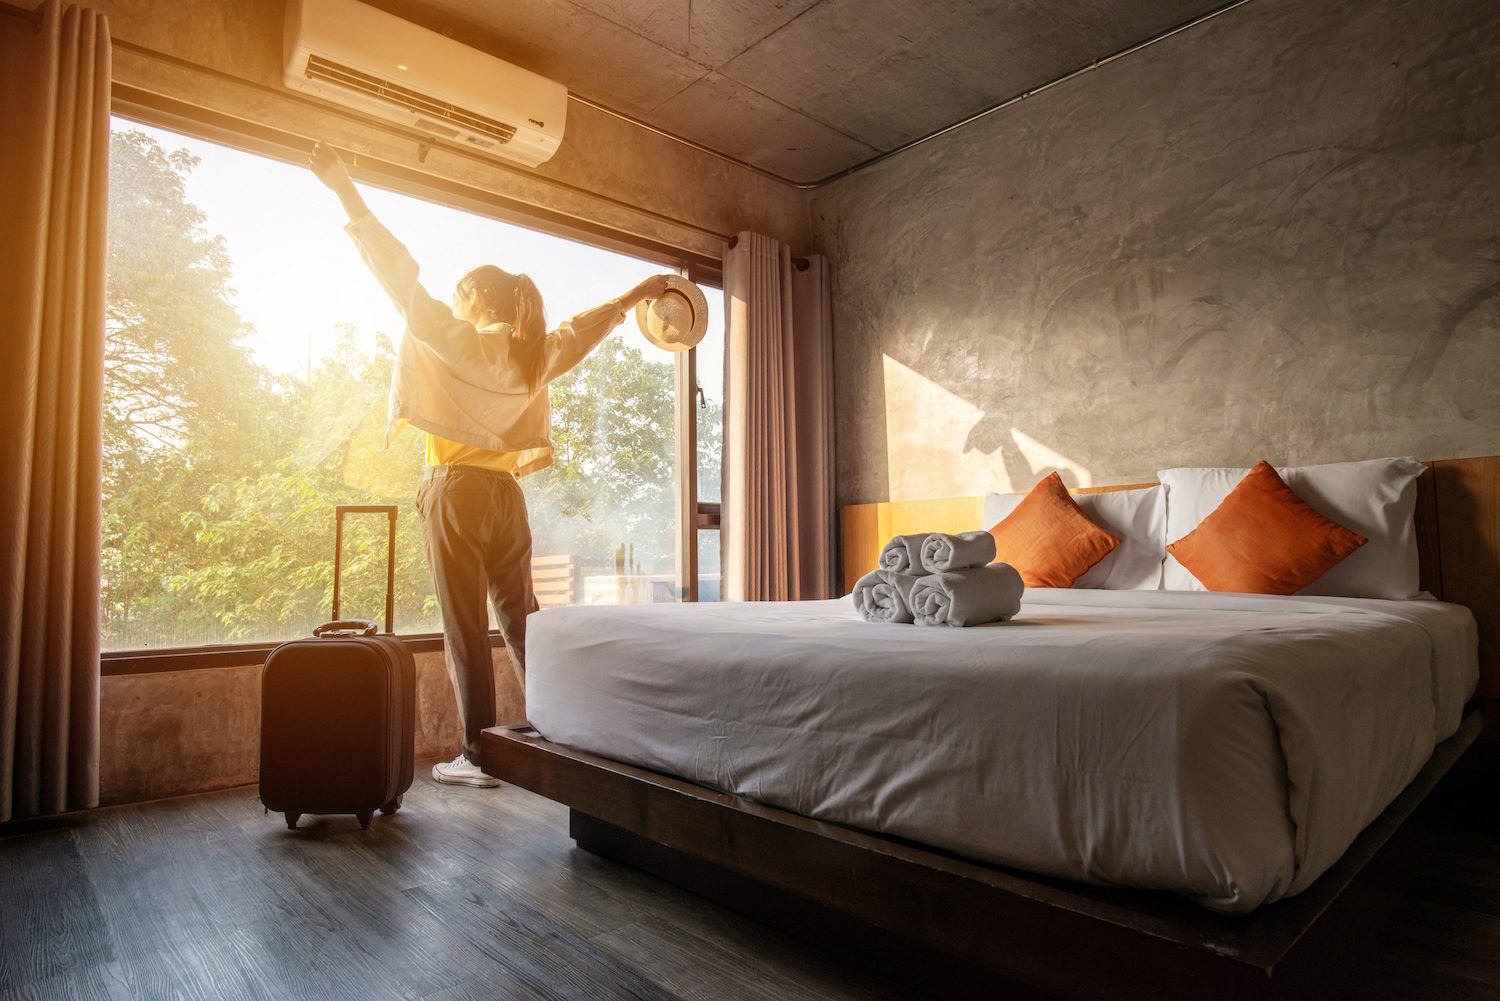 Do We Sleep Better in Airbnbs or Hotels?